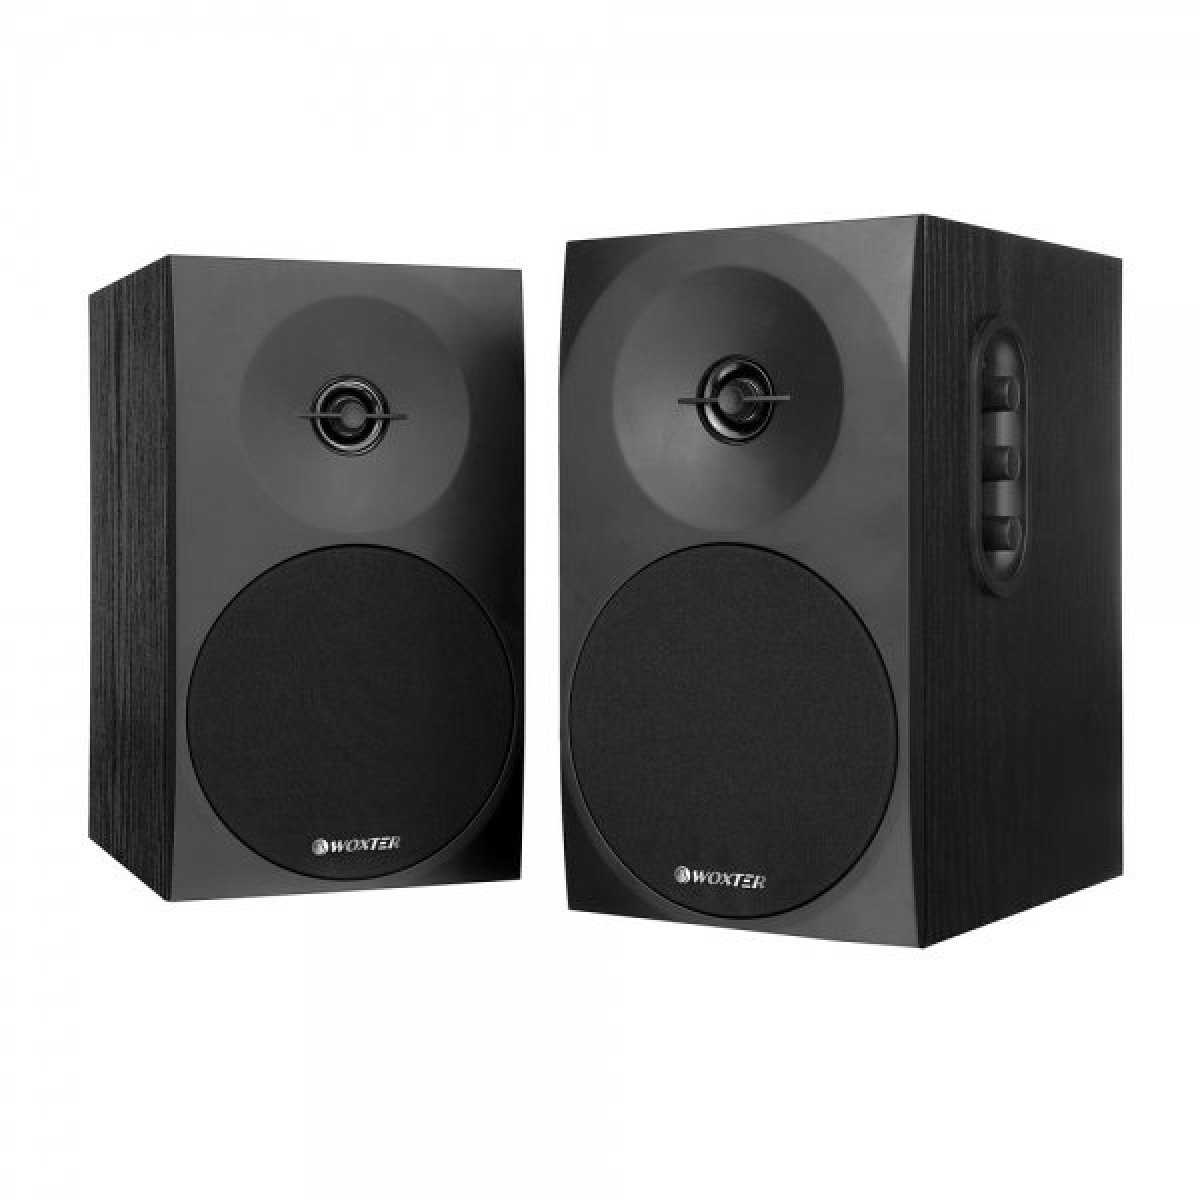 ALTAVOCES MULTIMEDIA DYNAMIC DL-410 150W WOXTER NG